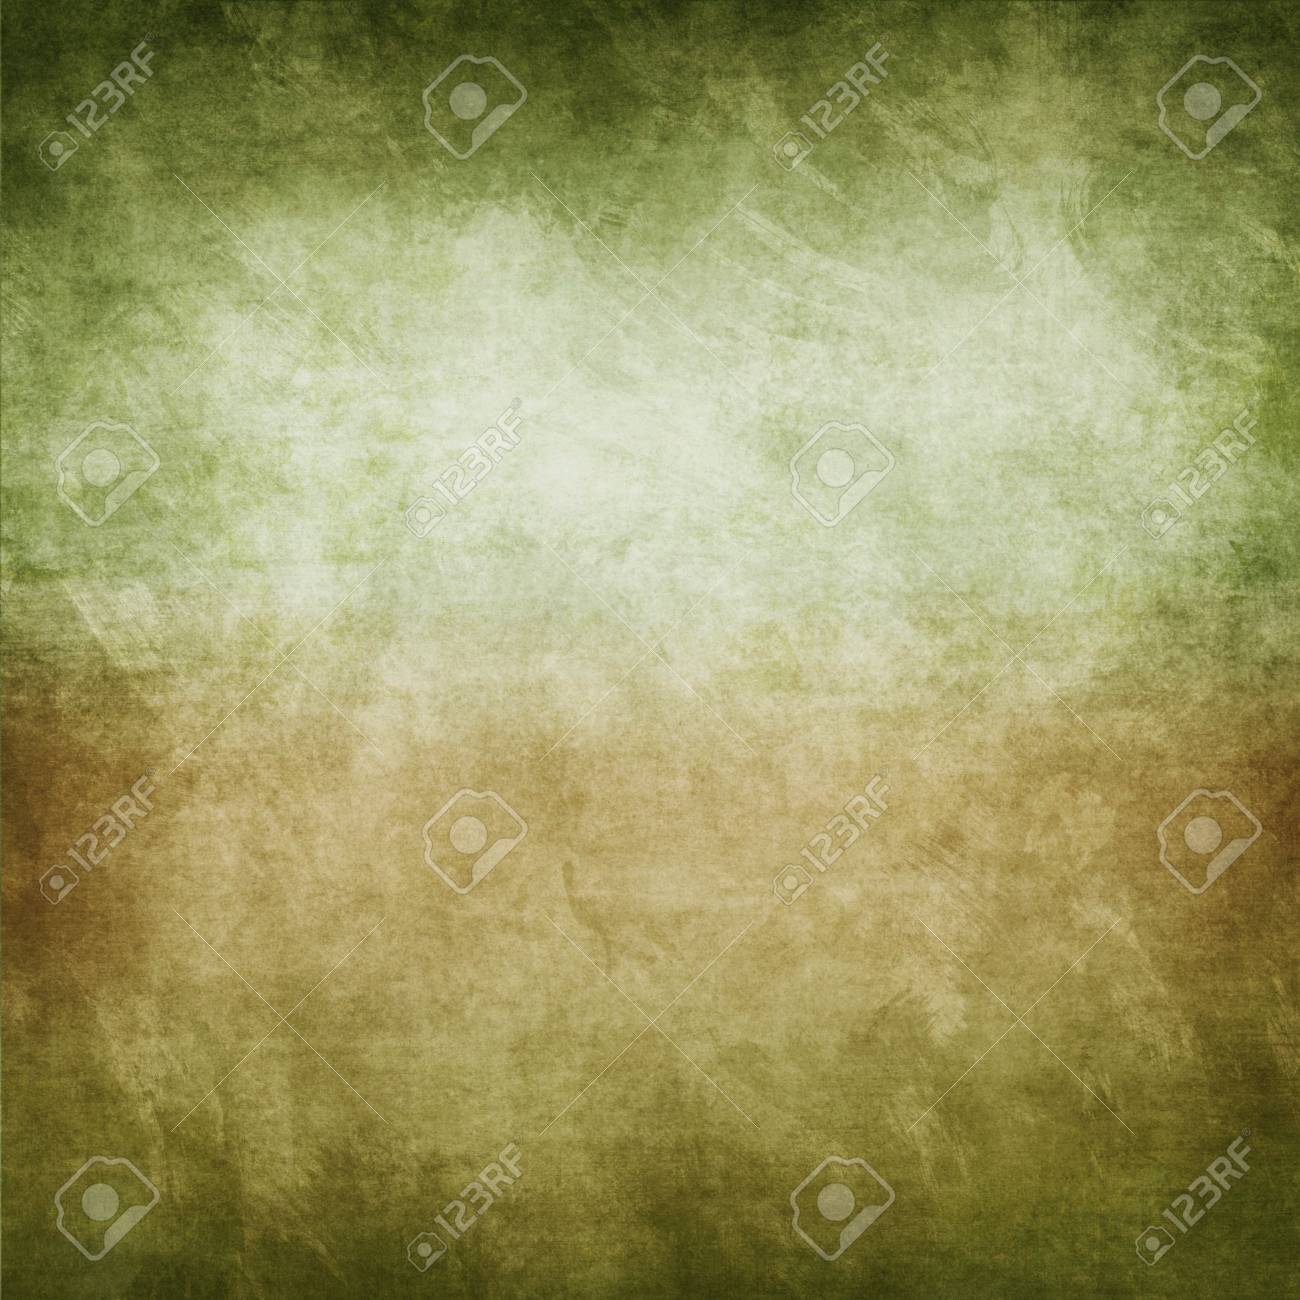 Earthy Background Image And Design Element Stock Photo Picture